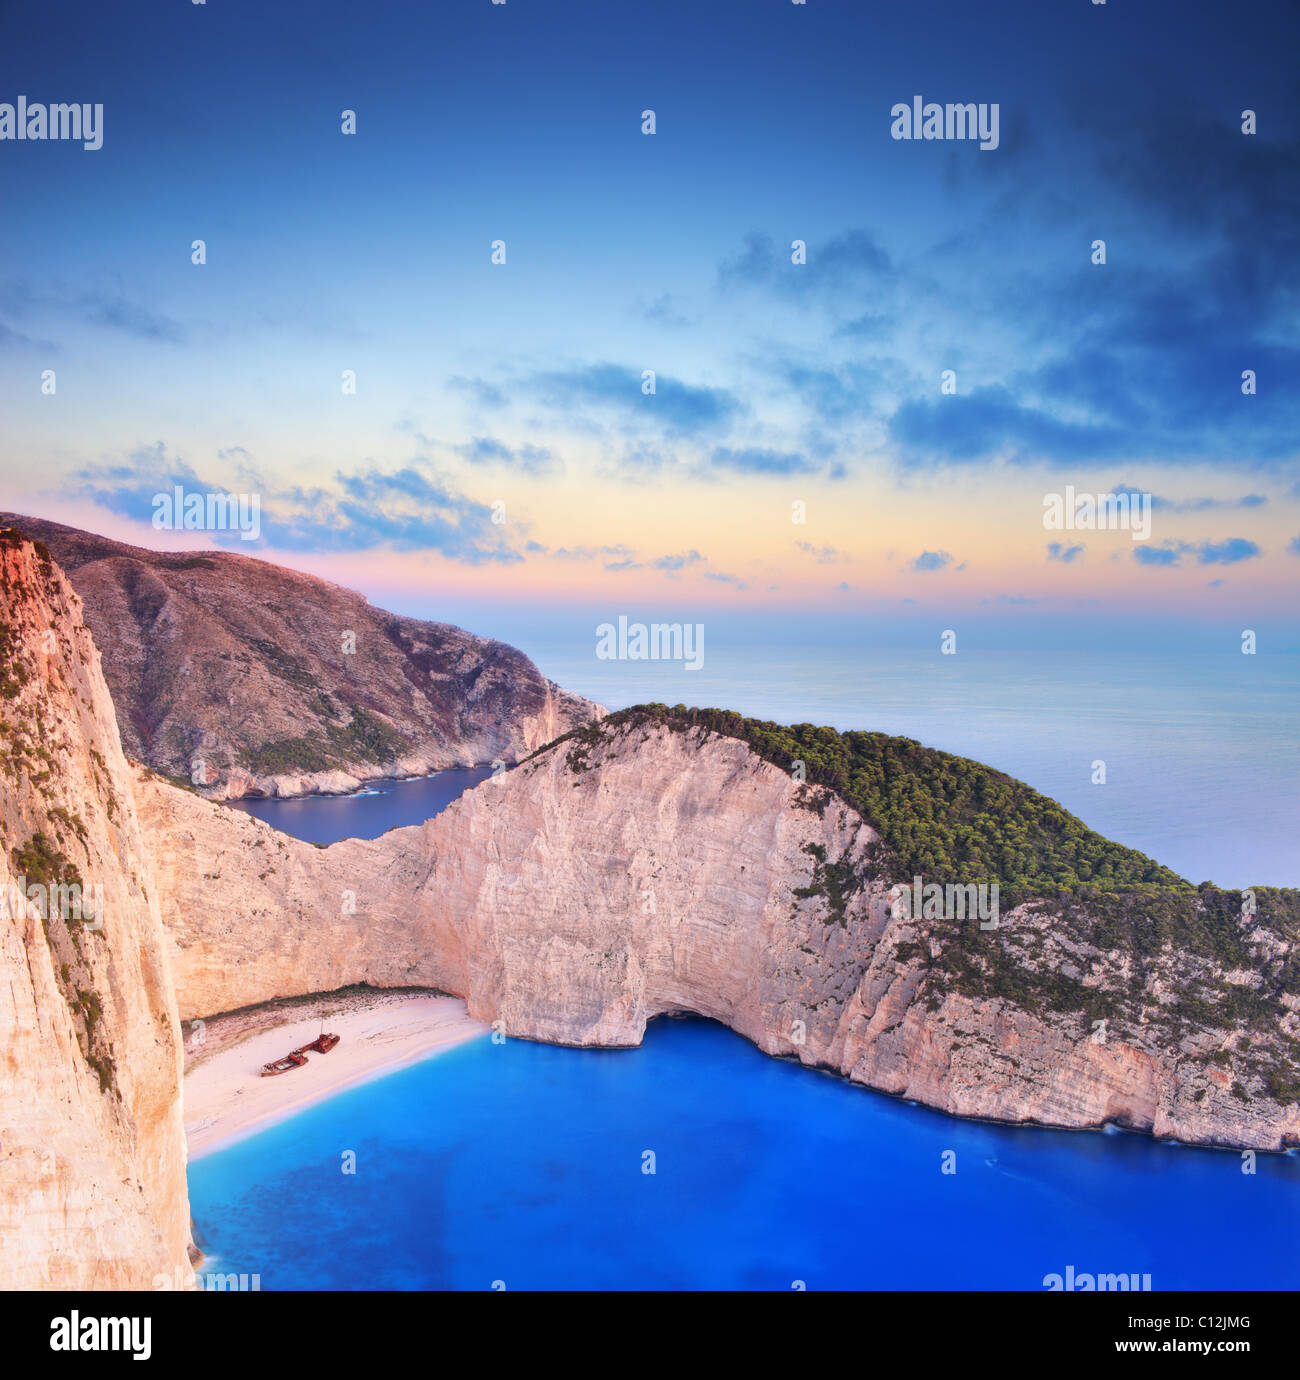 A panorama of Zakynthos island with a shipwreck on the sandy beach Stock Photo